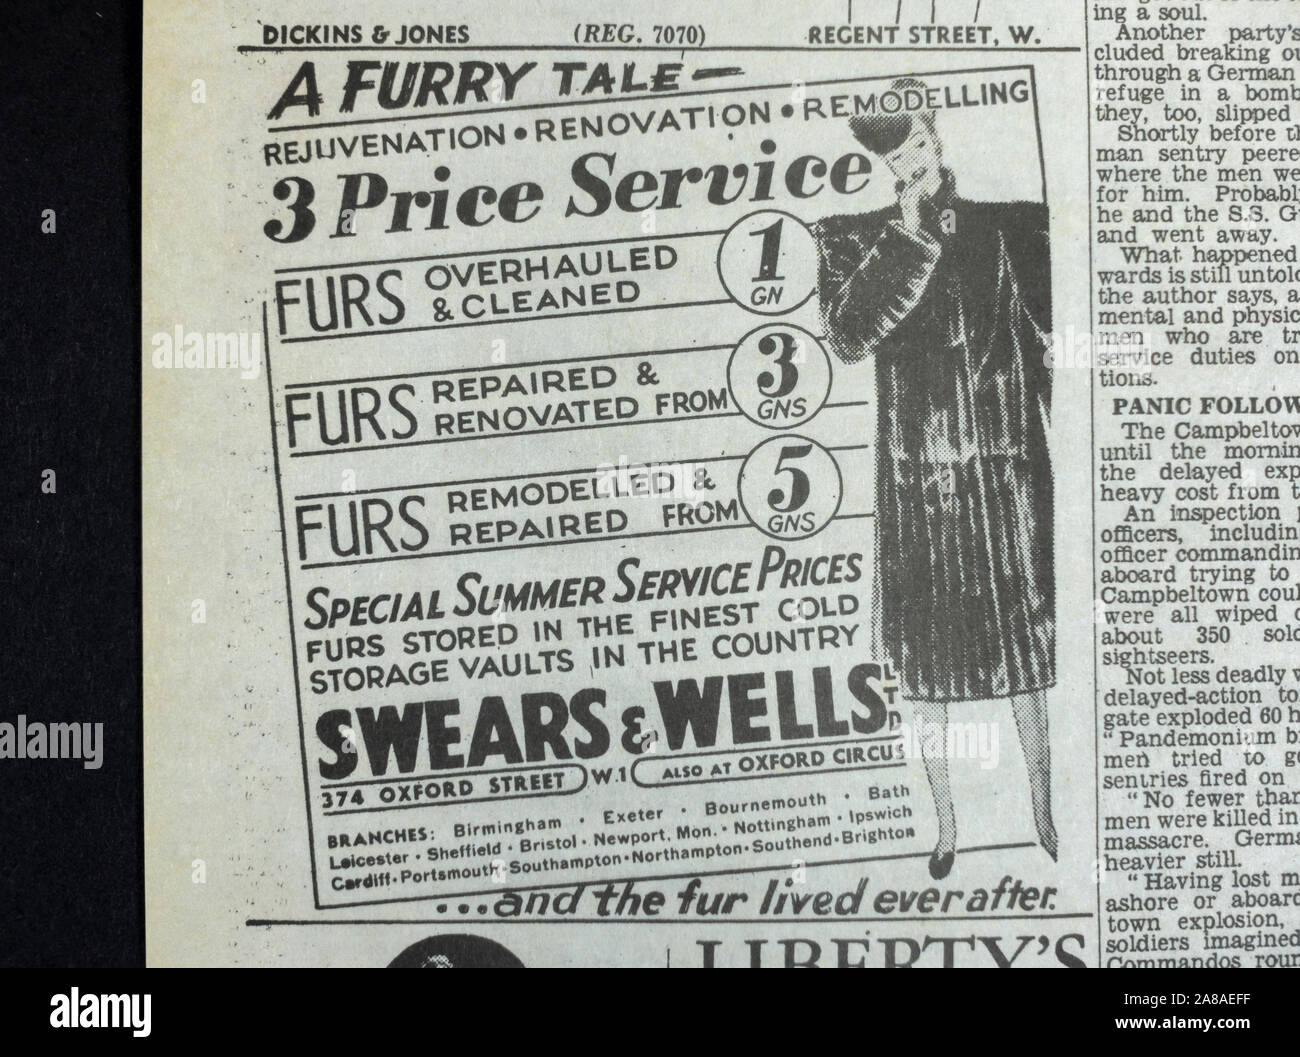 Advert for Swears & Wells fur stores in The Daily Telegraph (replica), 18th May 1943, the day after the Dam Busters raid. Stock Photo